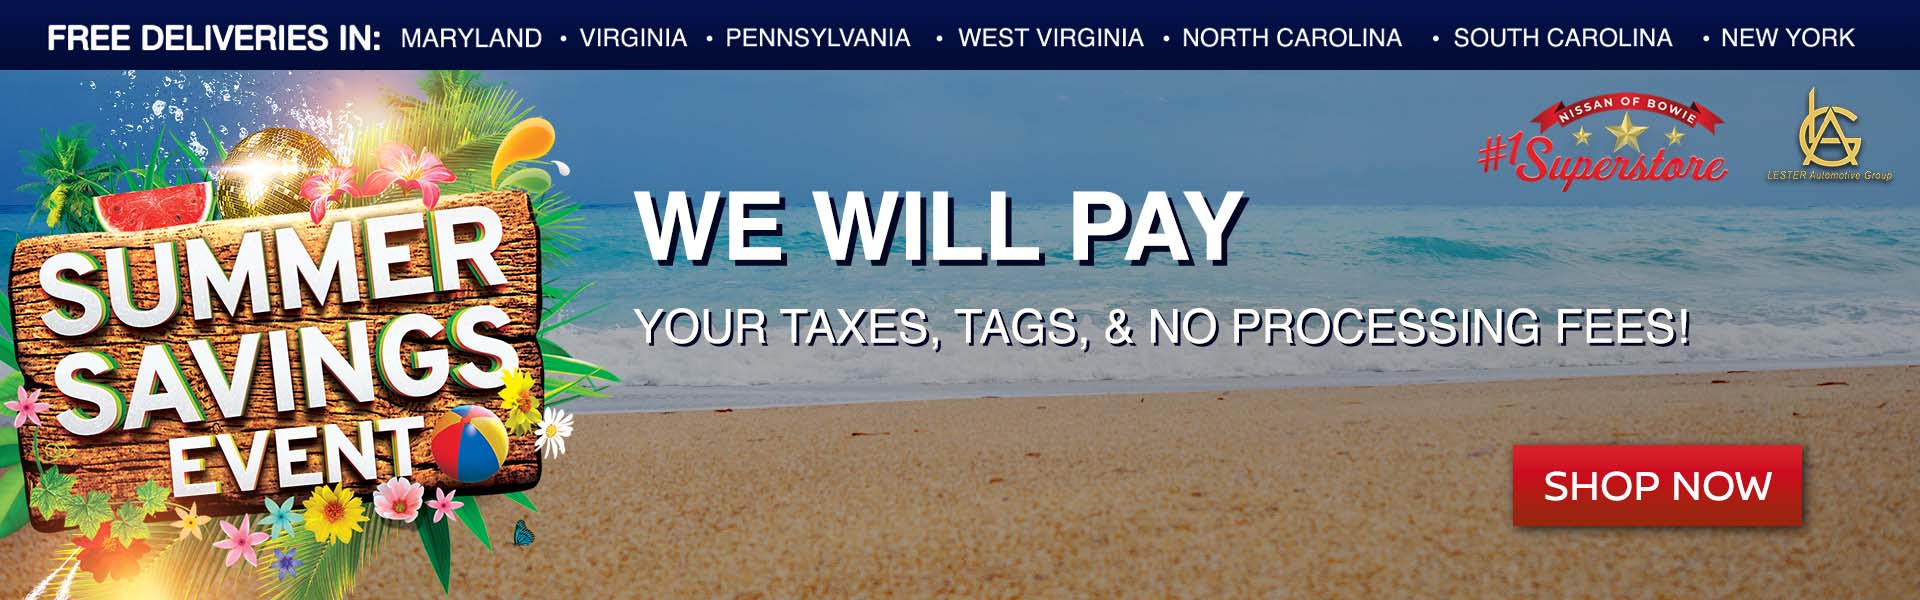 we will pay your taxes, tags, and no prcessing fees